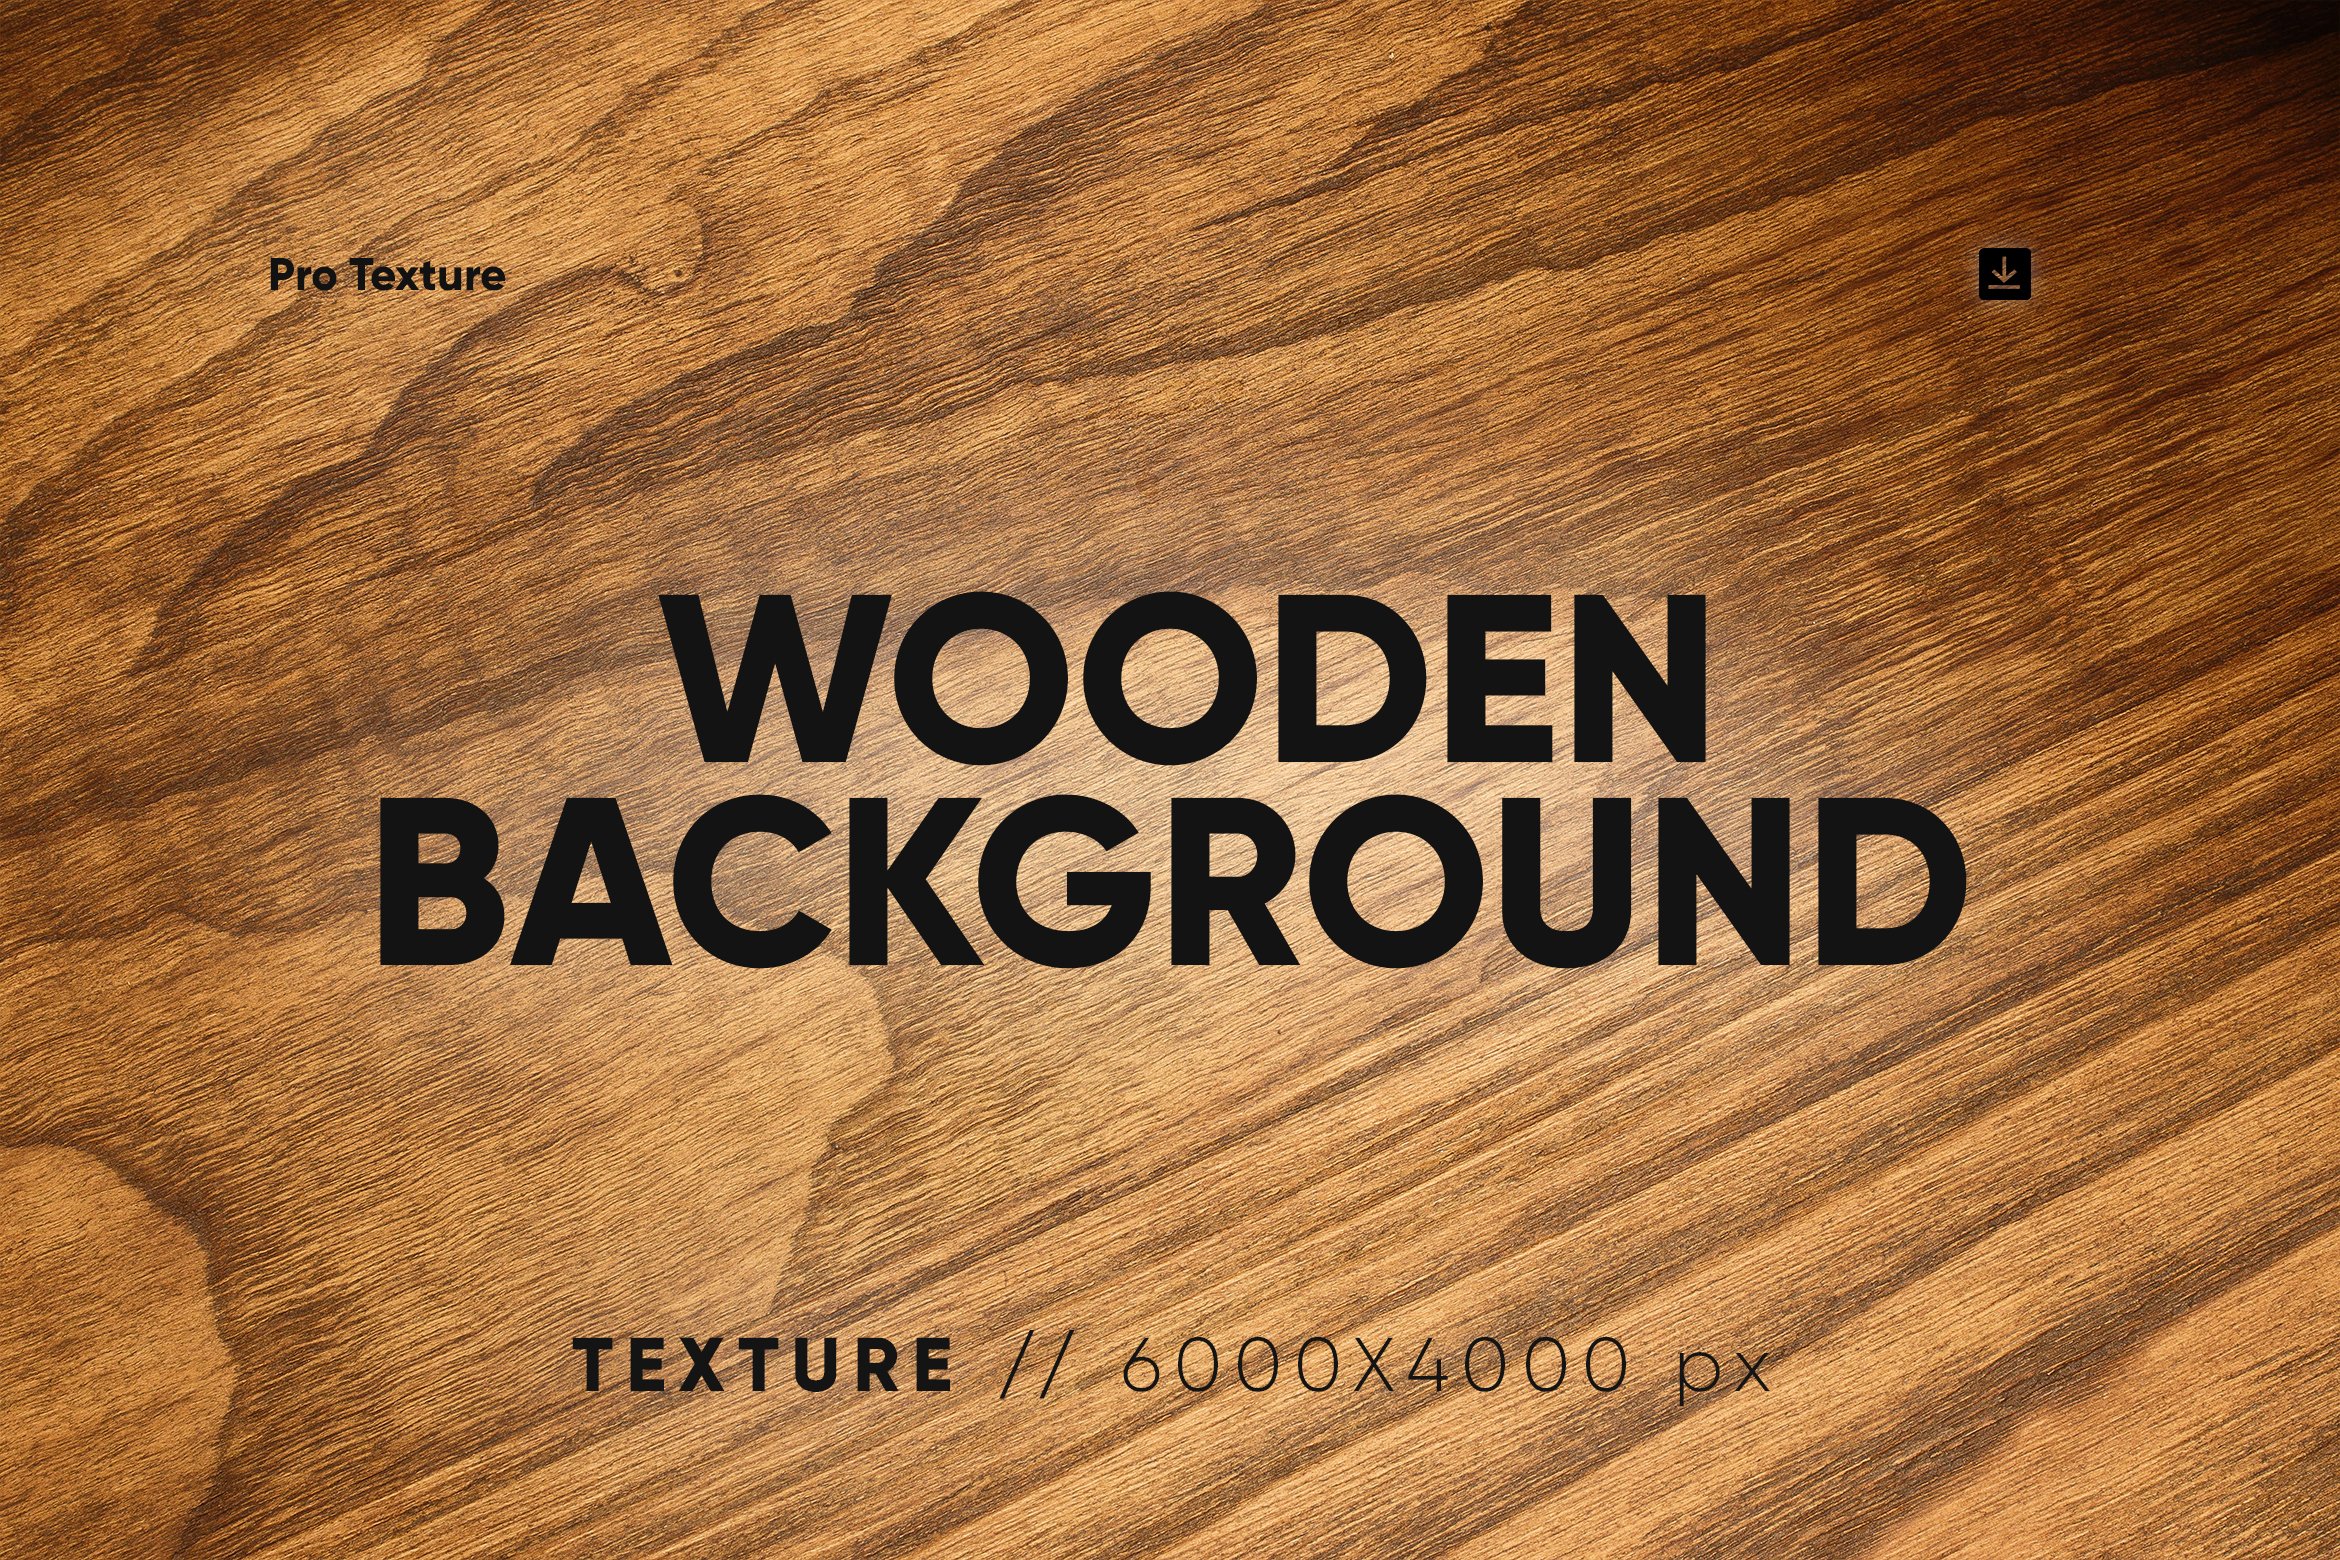 20 Wooden Background cover image.